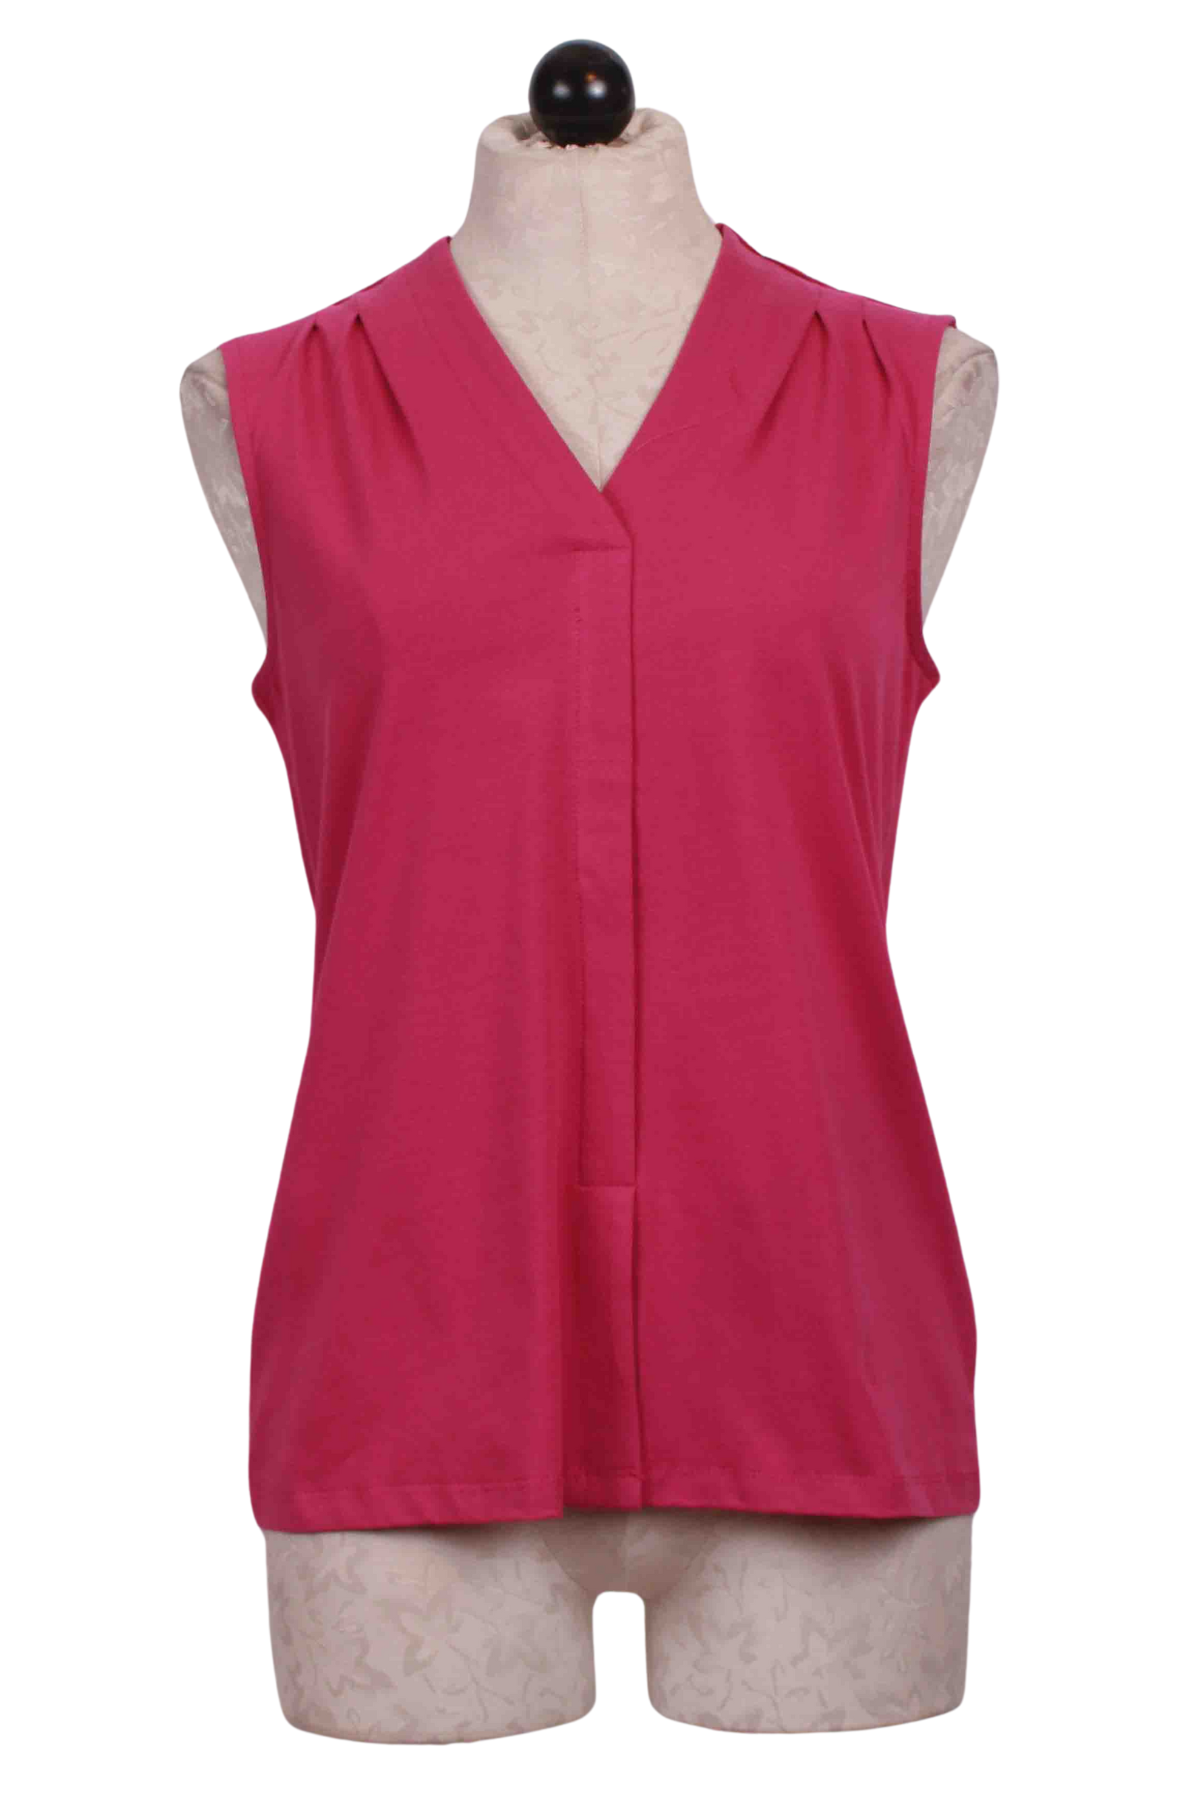 Berry colored Sleeveless V Neck Top by Claire Desjardins